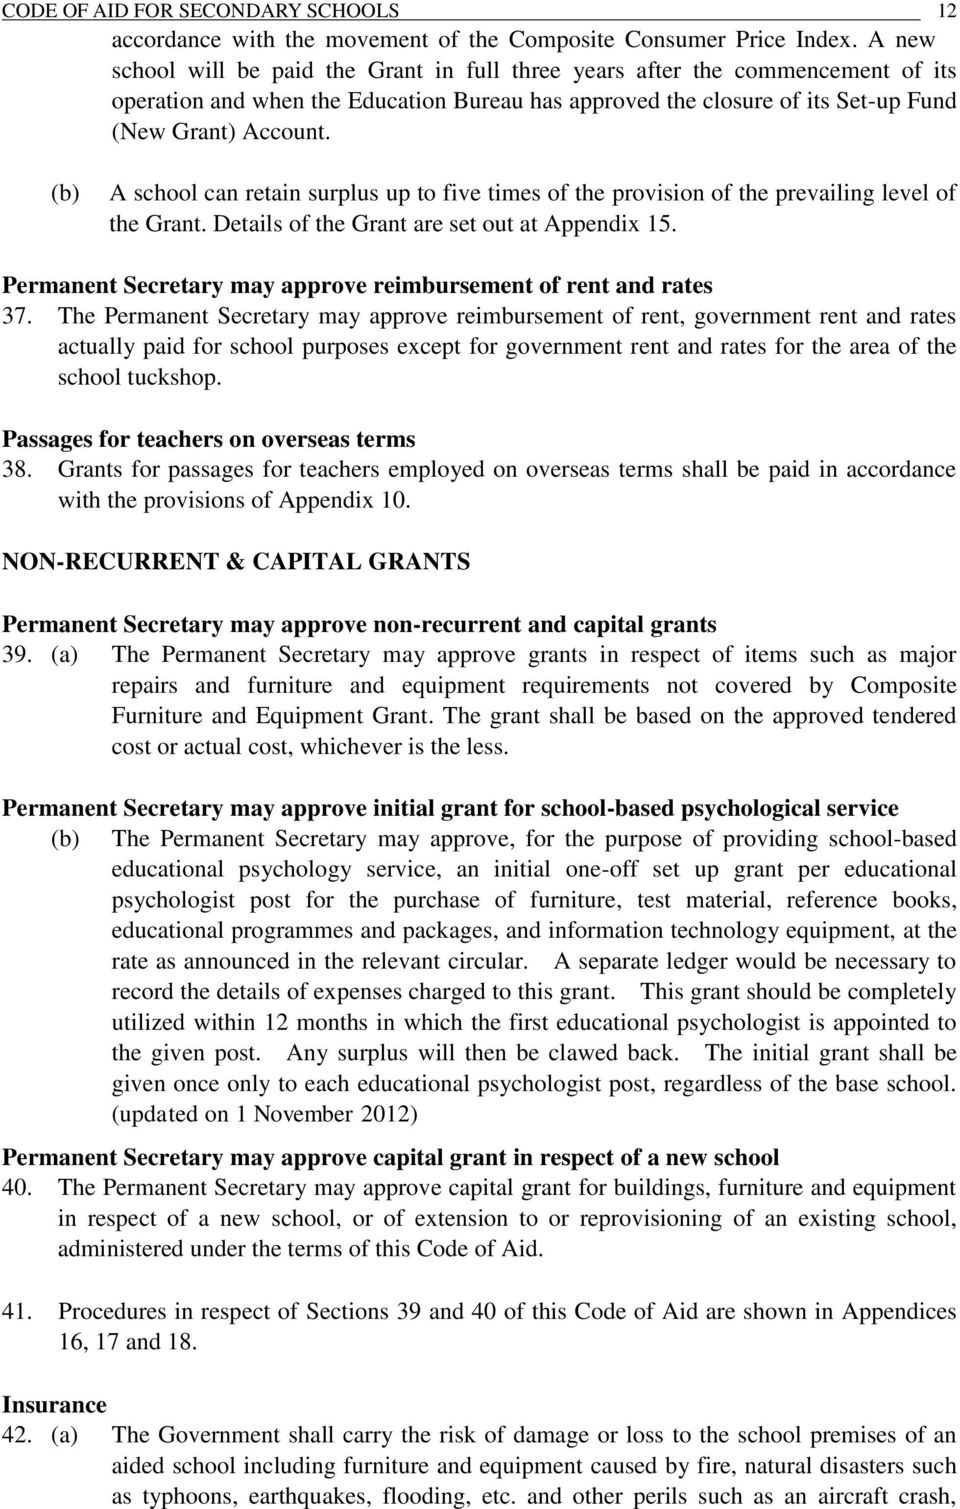 A school can retain surplus up to five times of the provision of the prevailing level of the Grant. Details of the Grant are set out at Appendix 15.